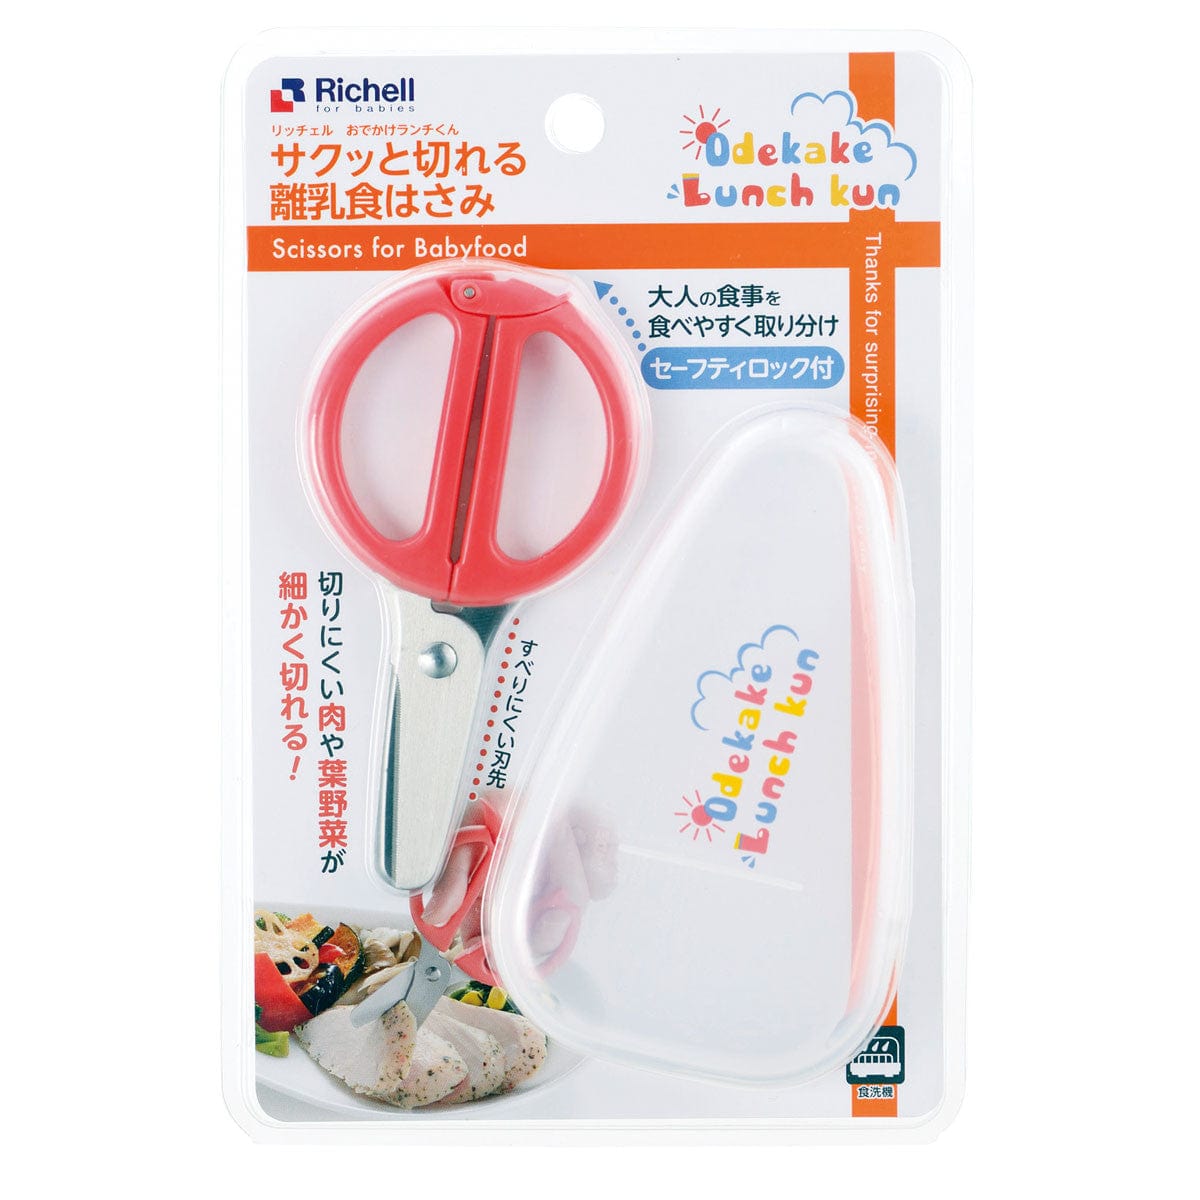 Richell - Odekake Lunch Kun Scissors for Baby Food with Storage Case -  Baby Food Scissors  Durio.sg